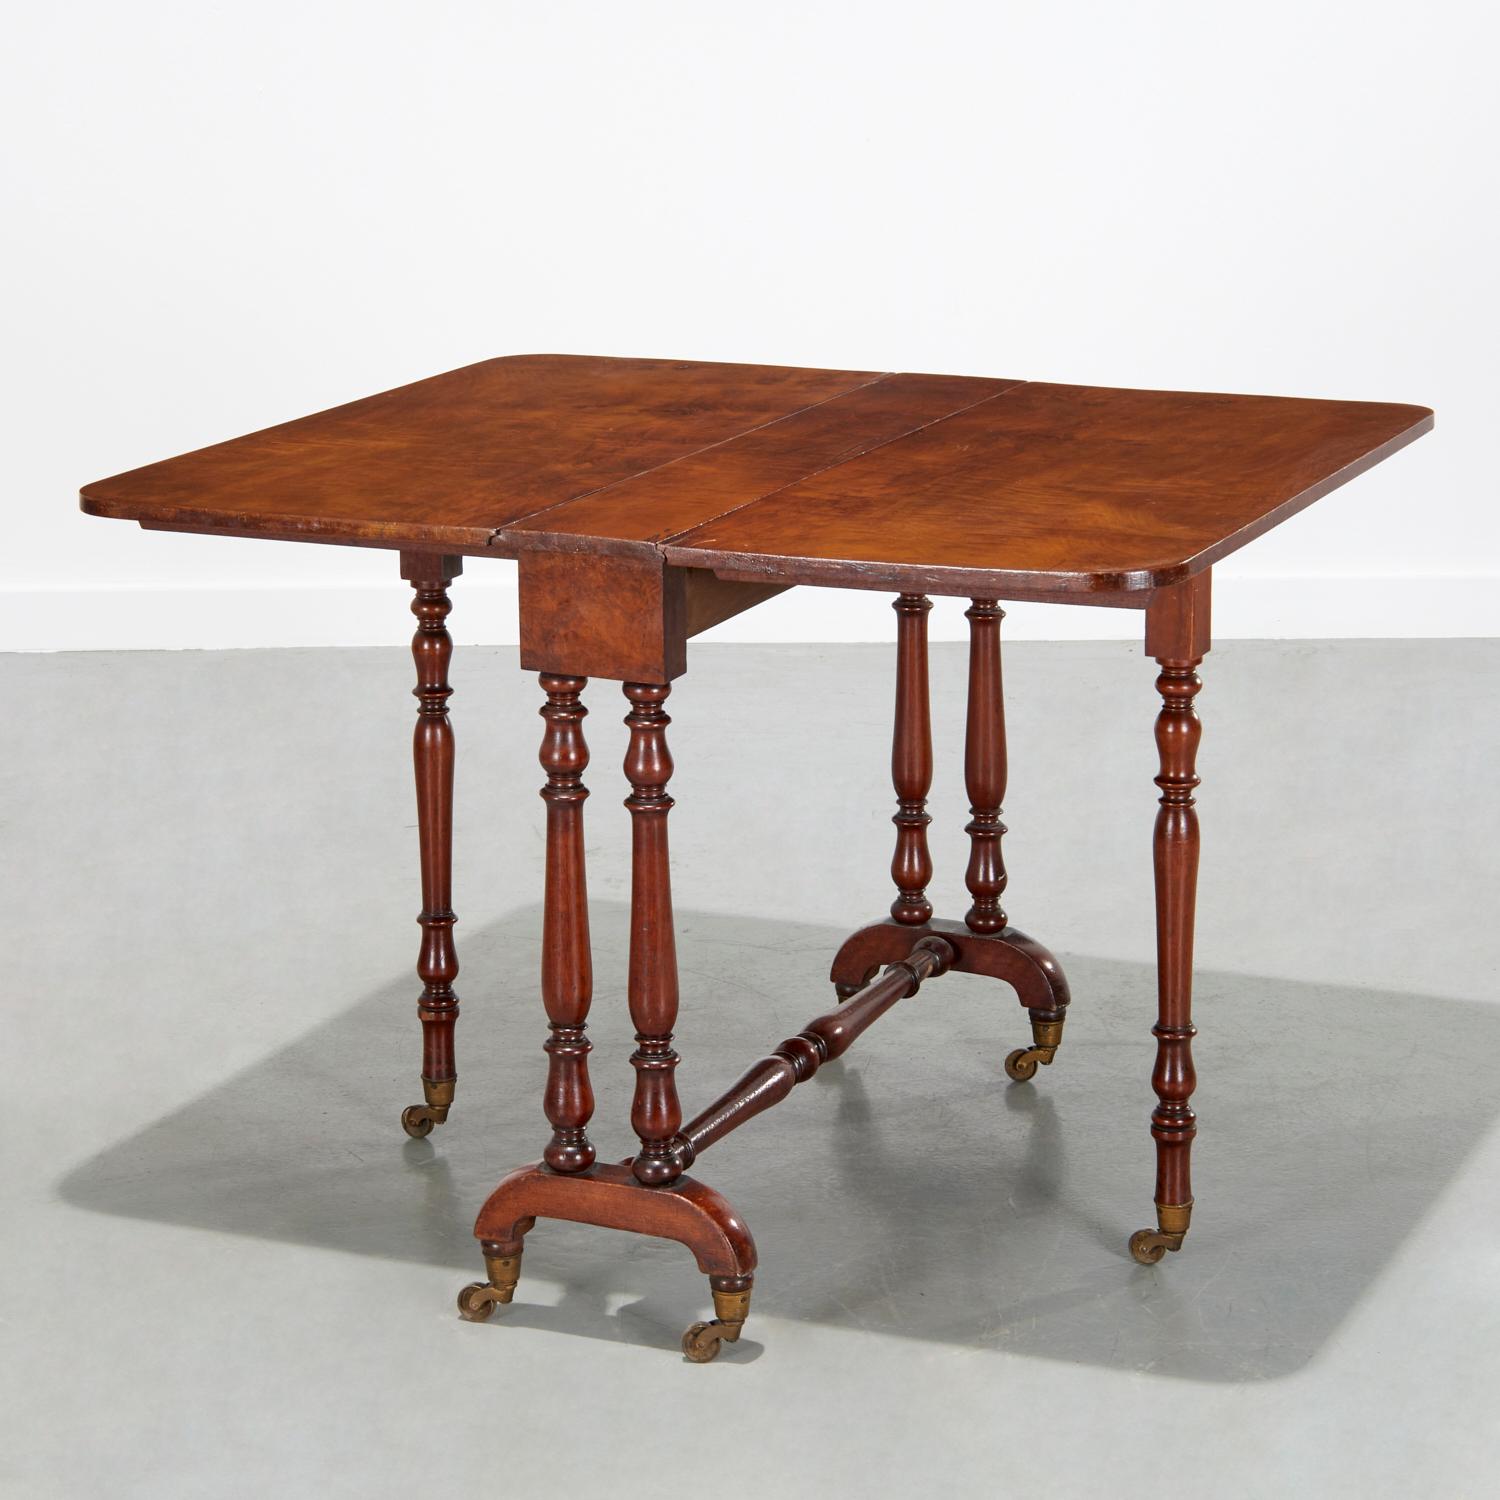 19th c. Victorian walnut Sutherland table with two drop leaves. the top is raised on elegant turned baluster legs on original brass casters.

This particular type of drop leaf table, or gate-leg table, is known as a Sutherland table, apparently